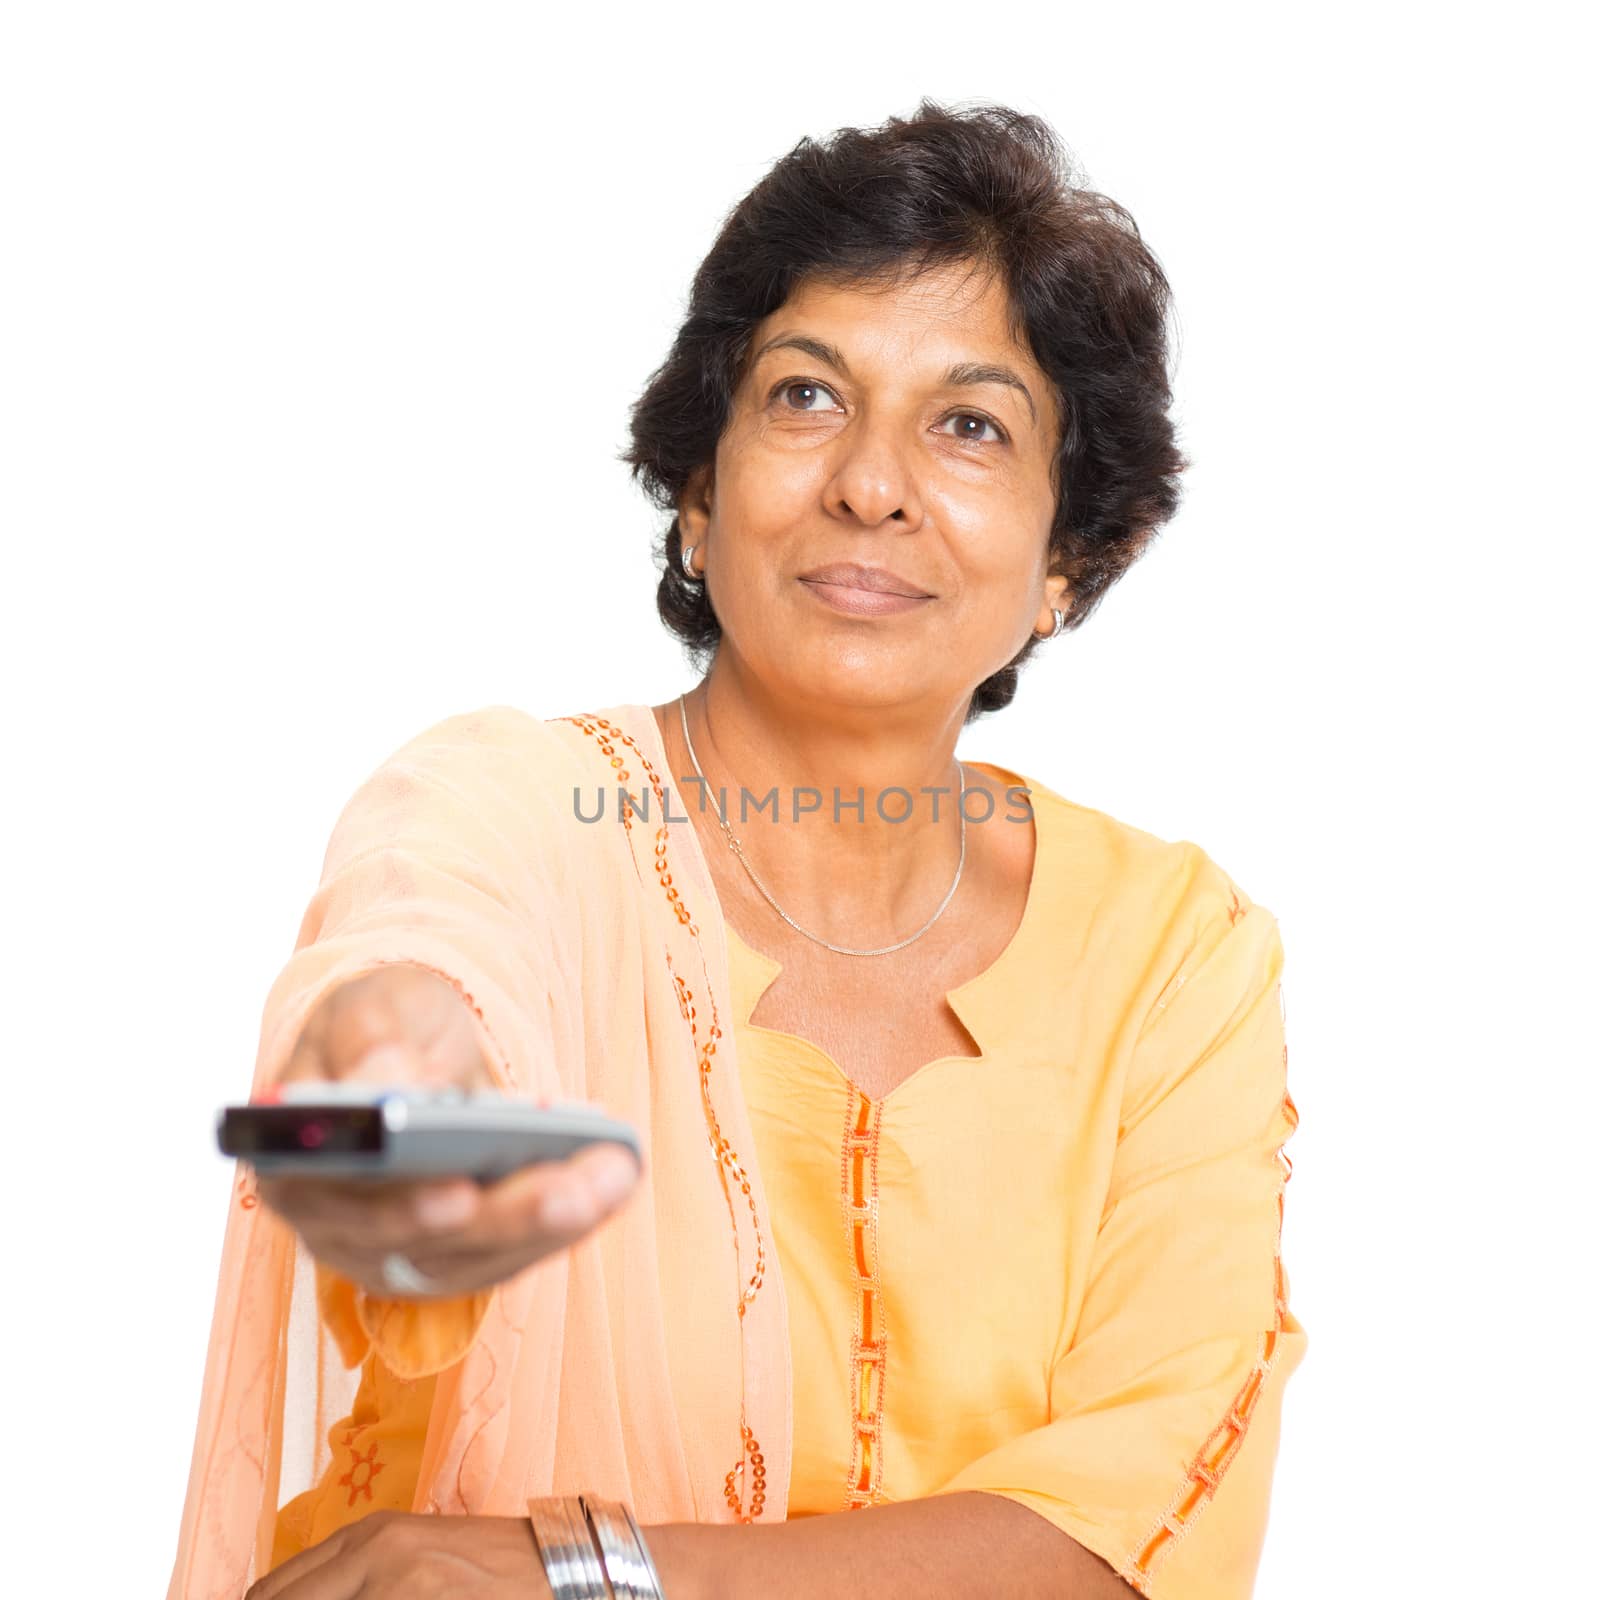 Portrait of a 50s Indian mature woman watching tv and hand holding remote control changing channel, isolated on white background.